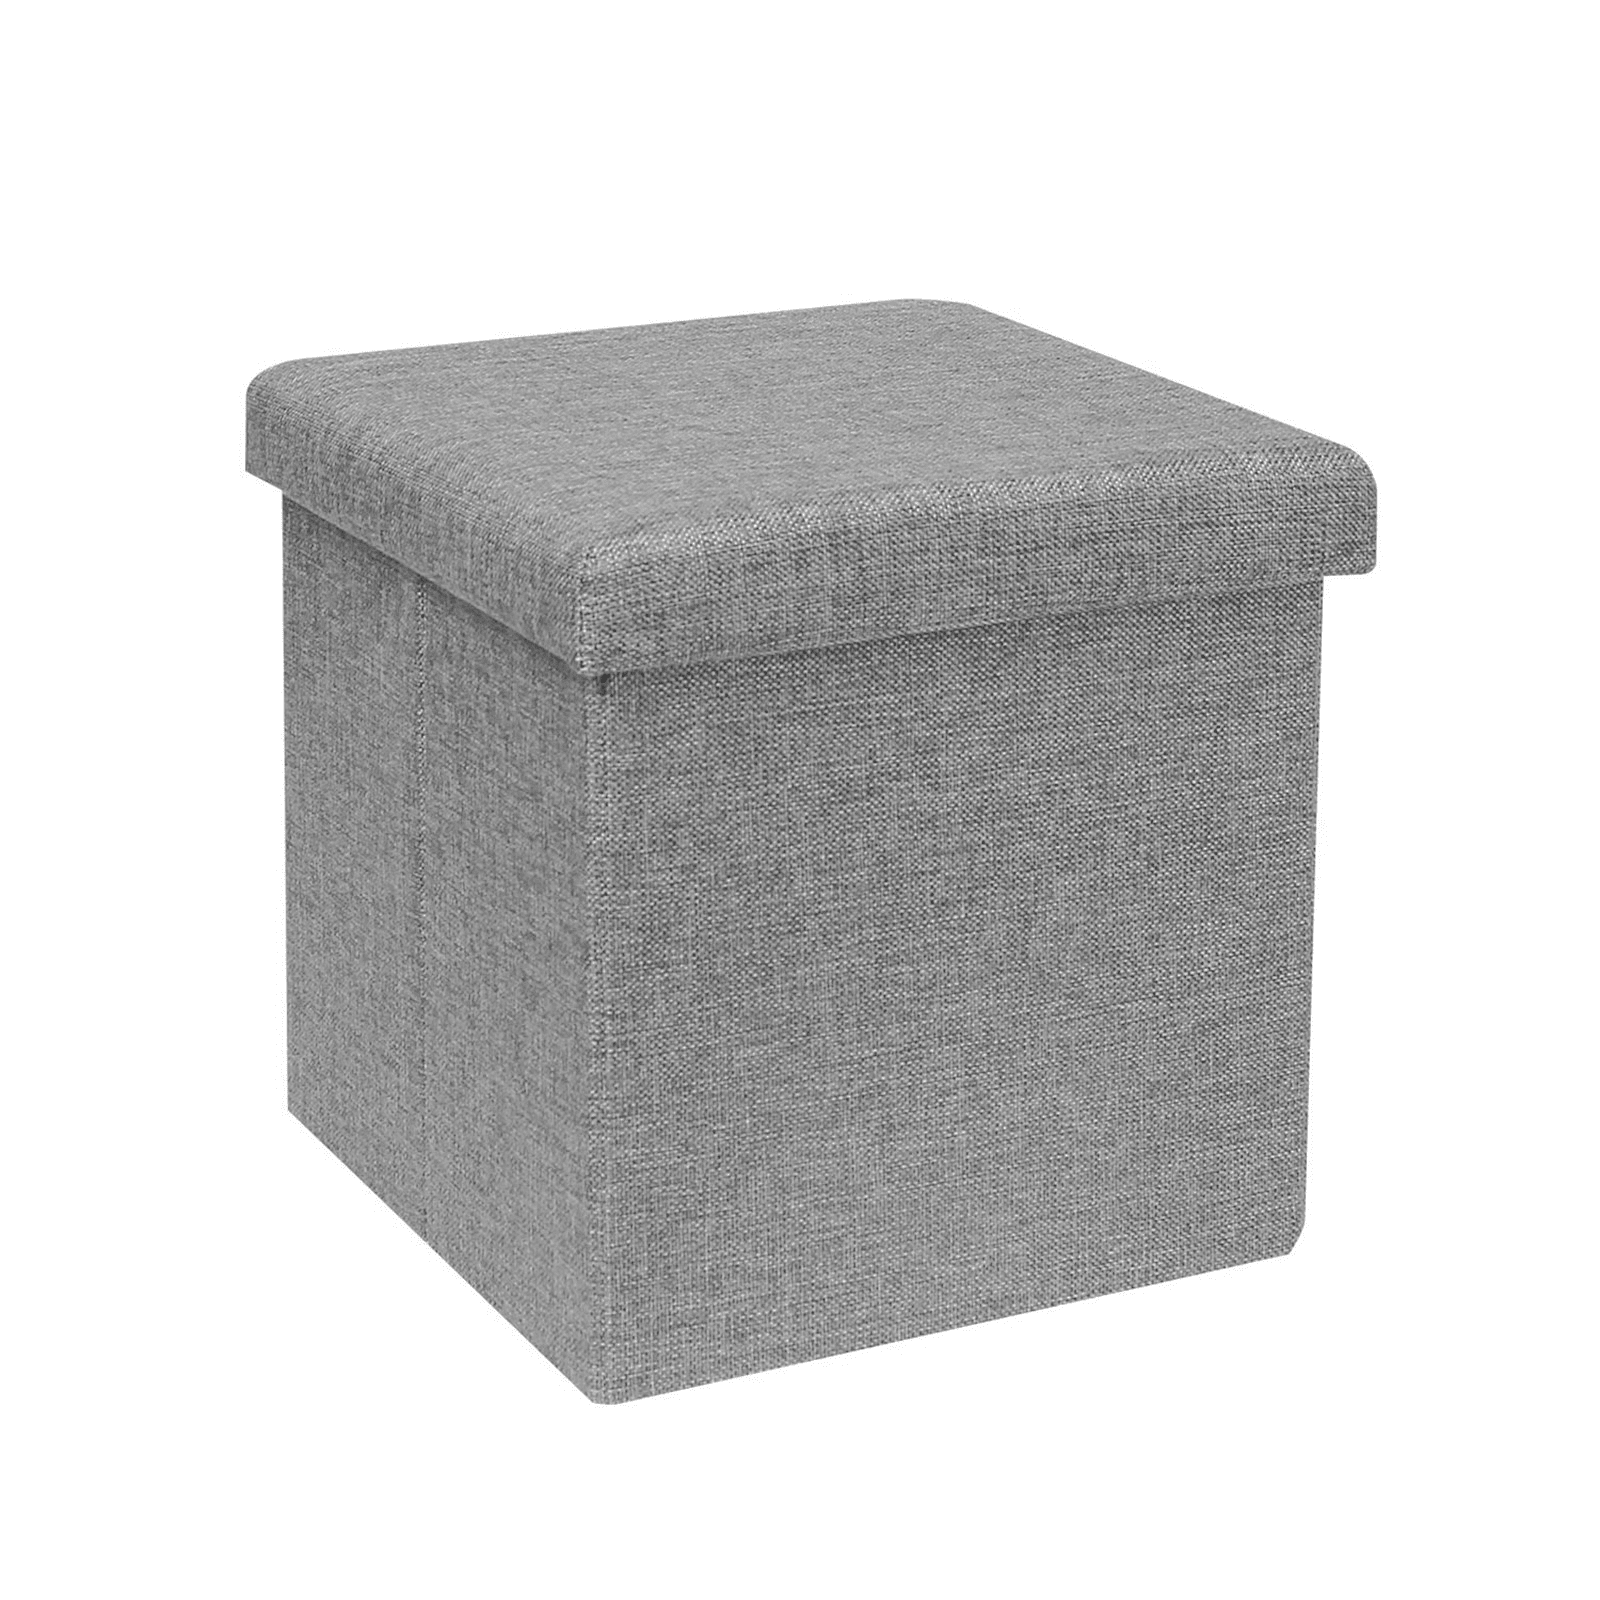 Building Block Look Foldable Ottoman Storage Room Toy Box Pouffe Seat Stool 